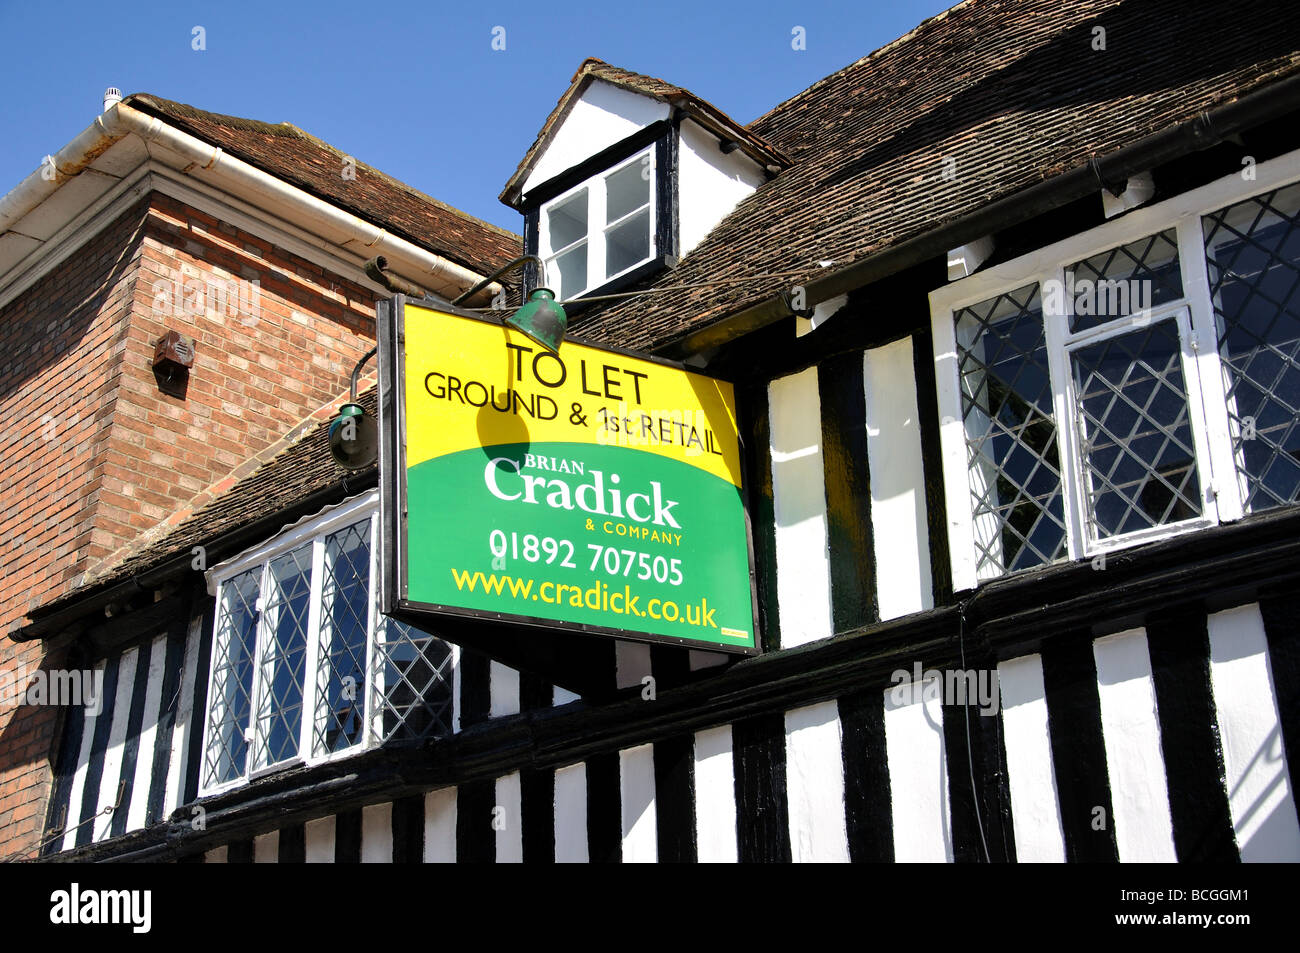 To let sign, High Street, Tenterden, Kent, England, United Kingdom Stock Photo